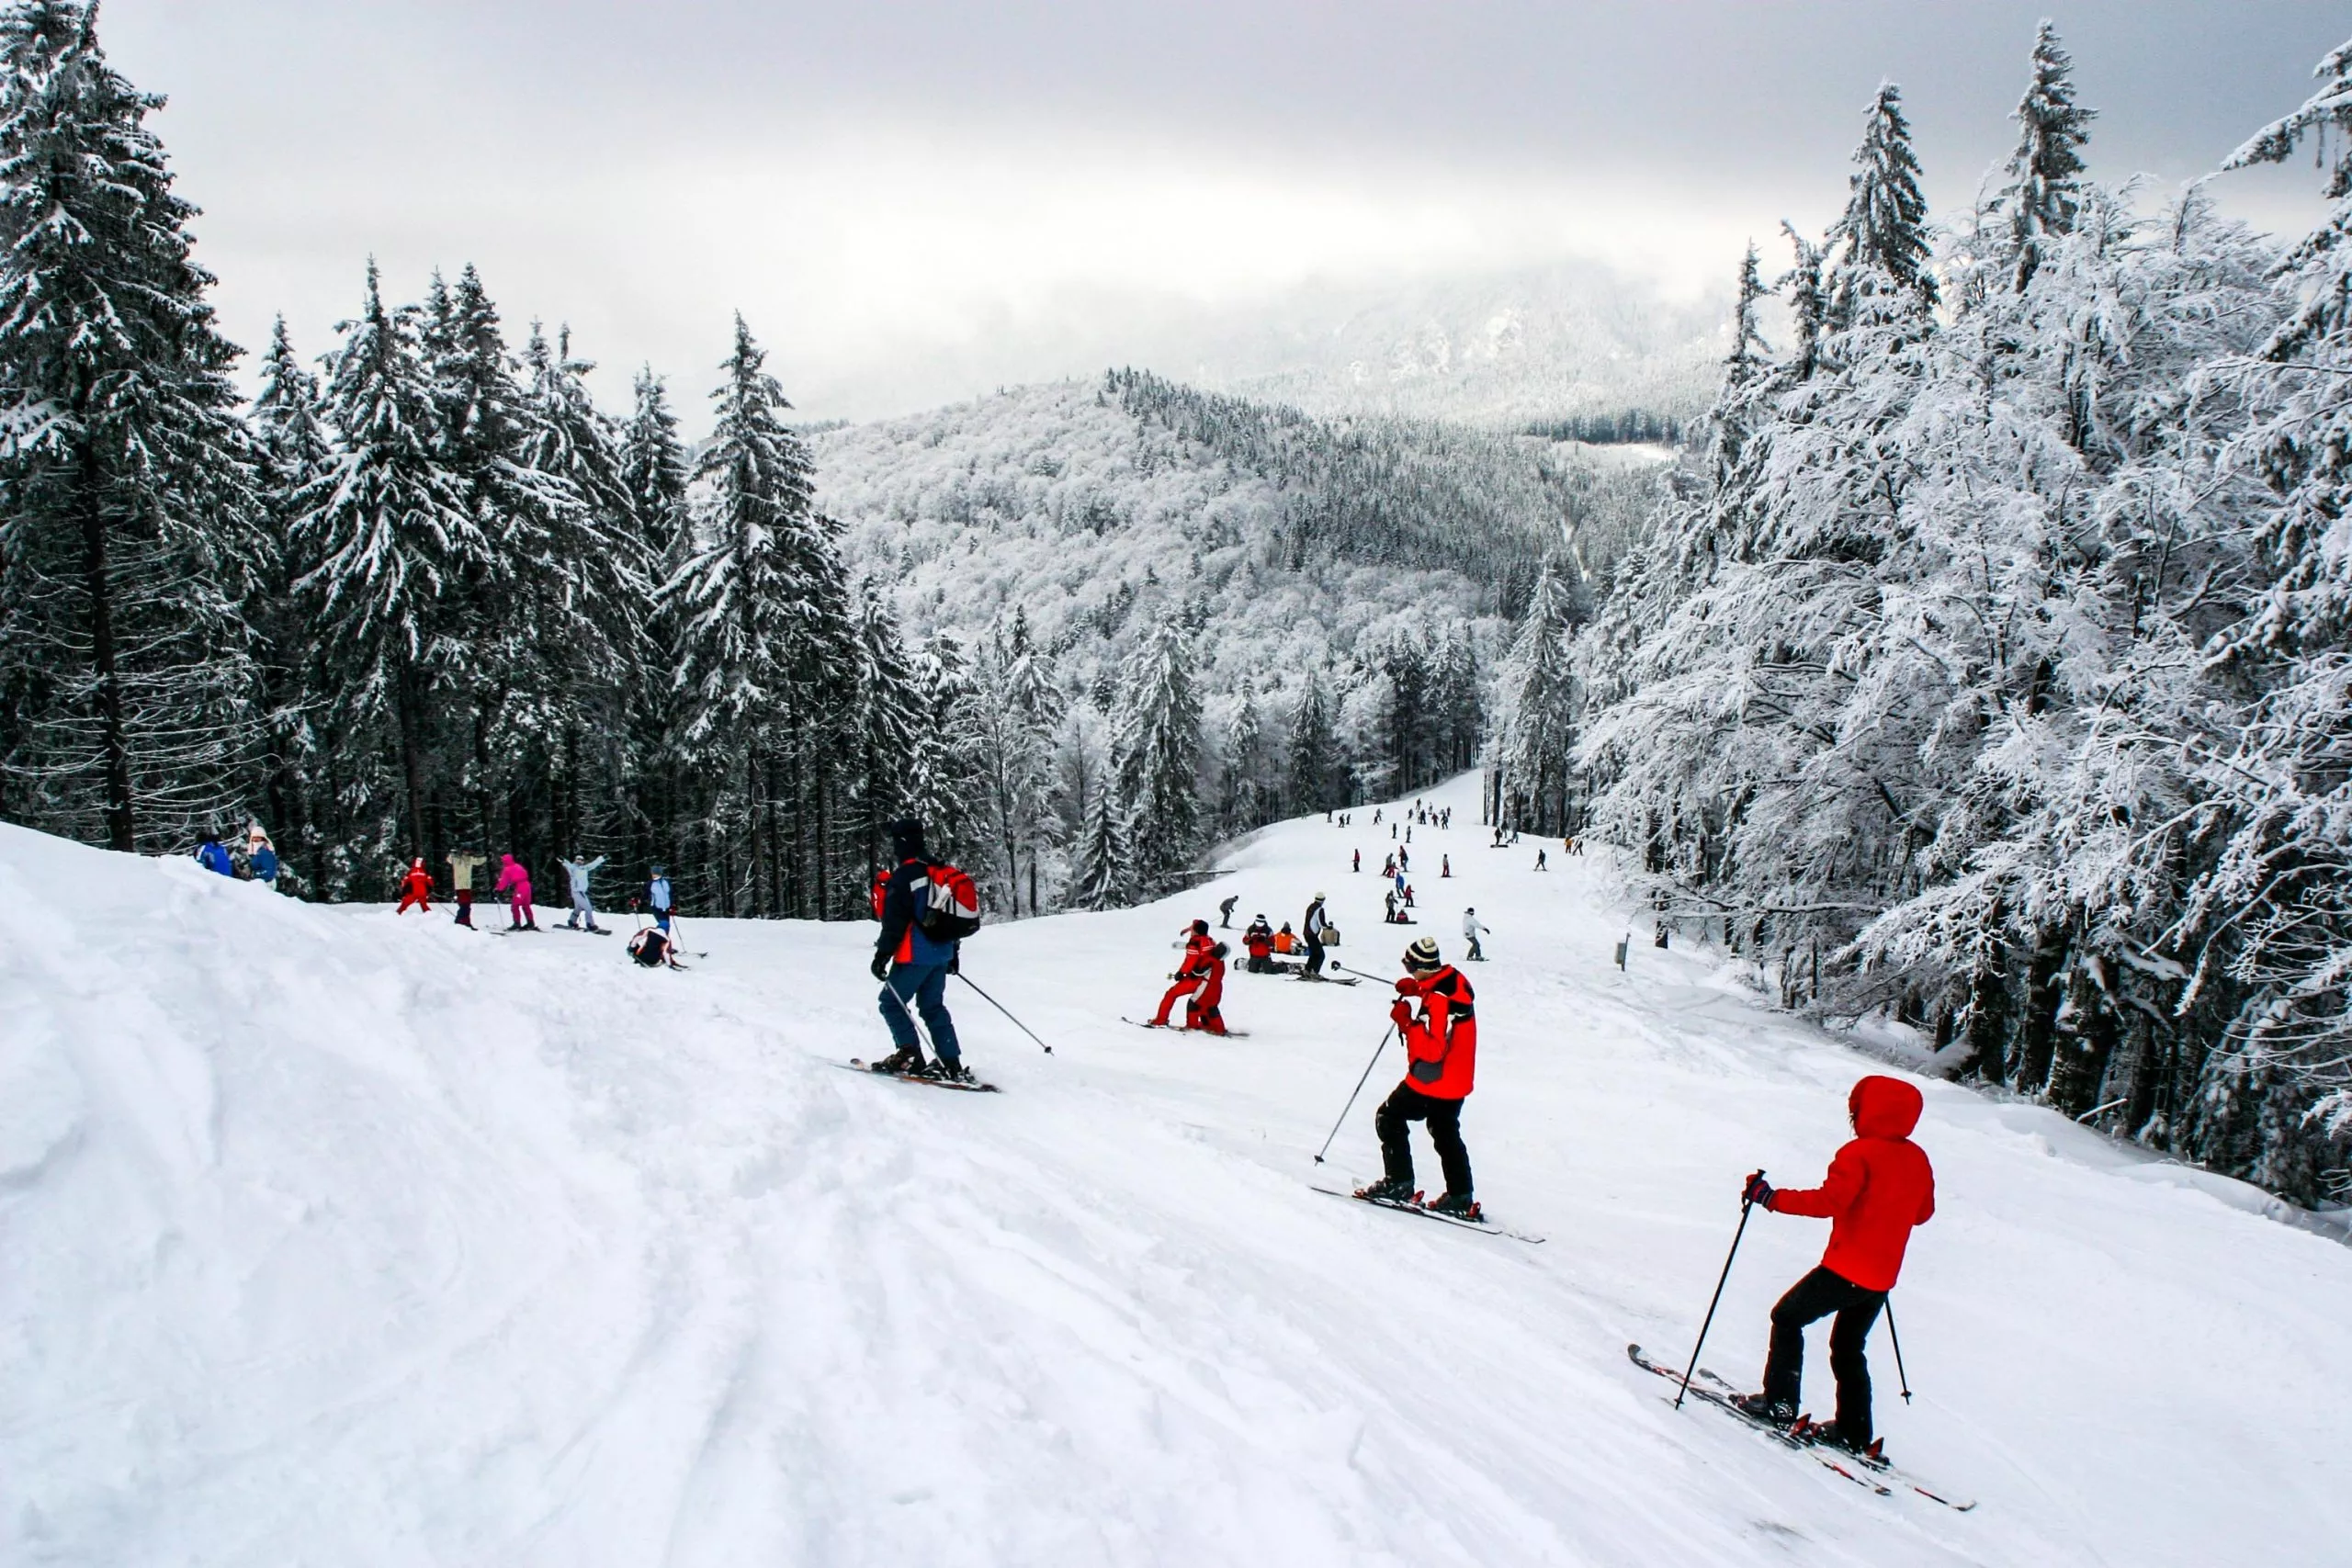 Winter Sports Instructors Sinaia in Romania, Europe | Snowboarding,Skiing - Rated 0.9